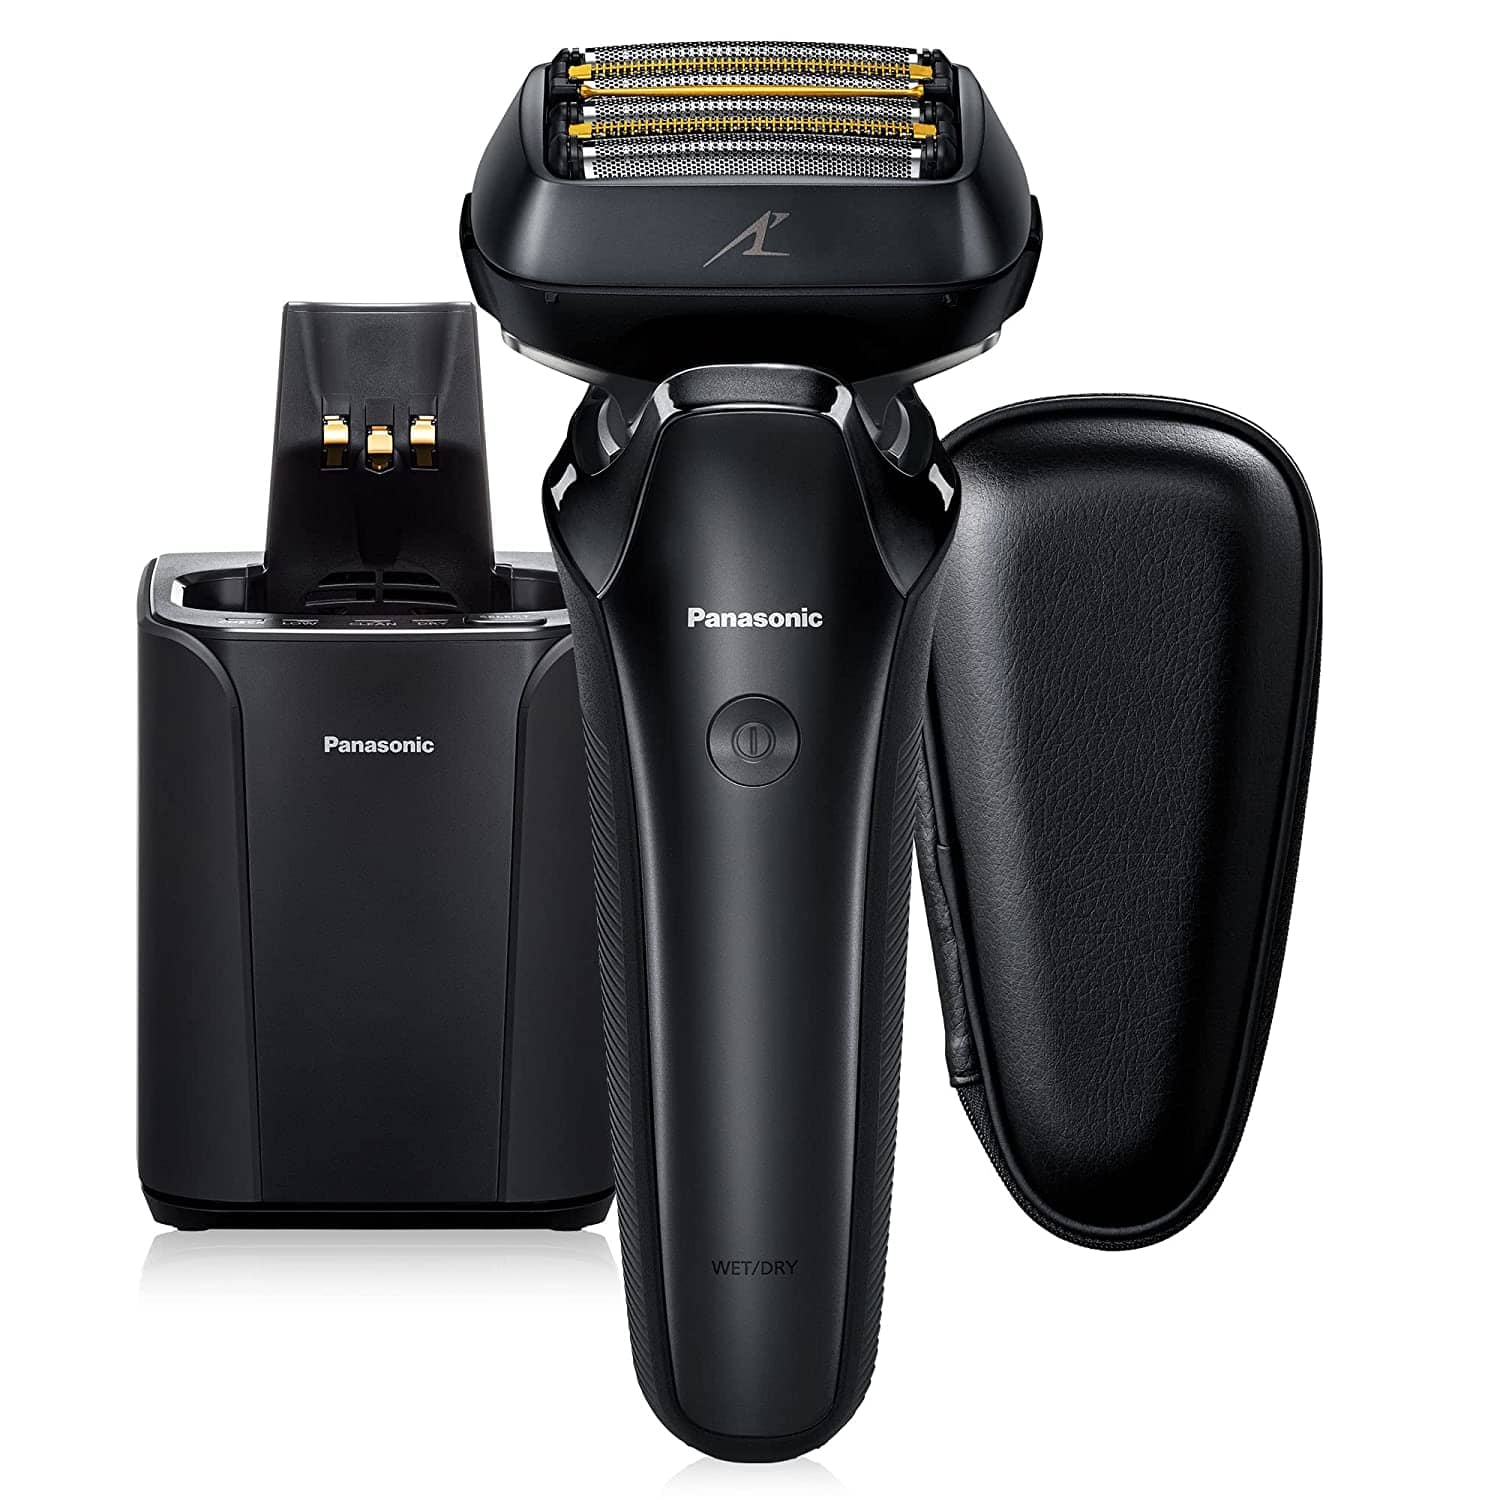 Panasonic Electric Razor for Men, Electric Shaver, ARC6 Six-Blade Electric Razor with Premium Automatic Cleaning and Charging Station